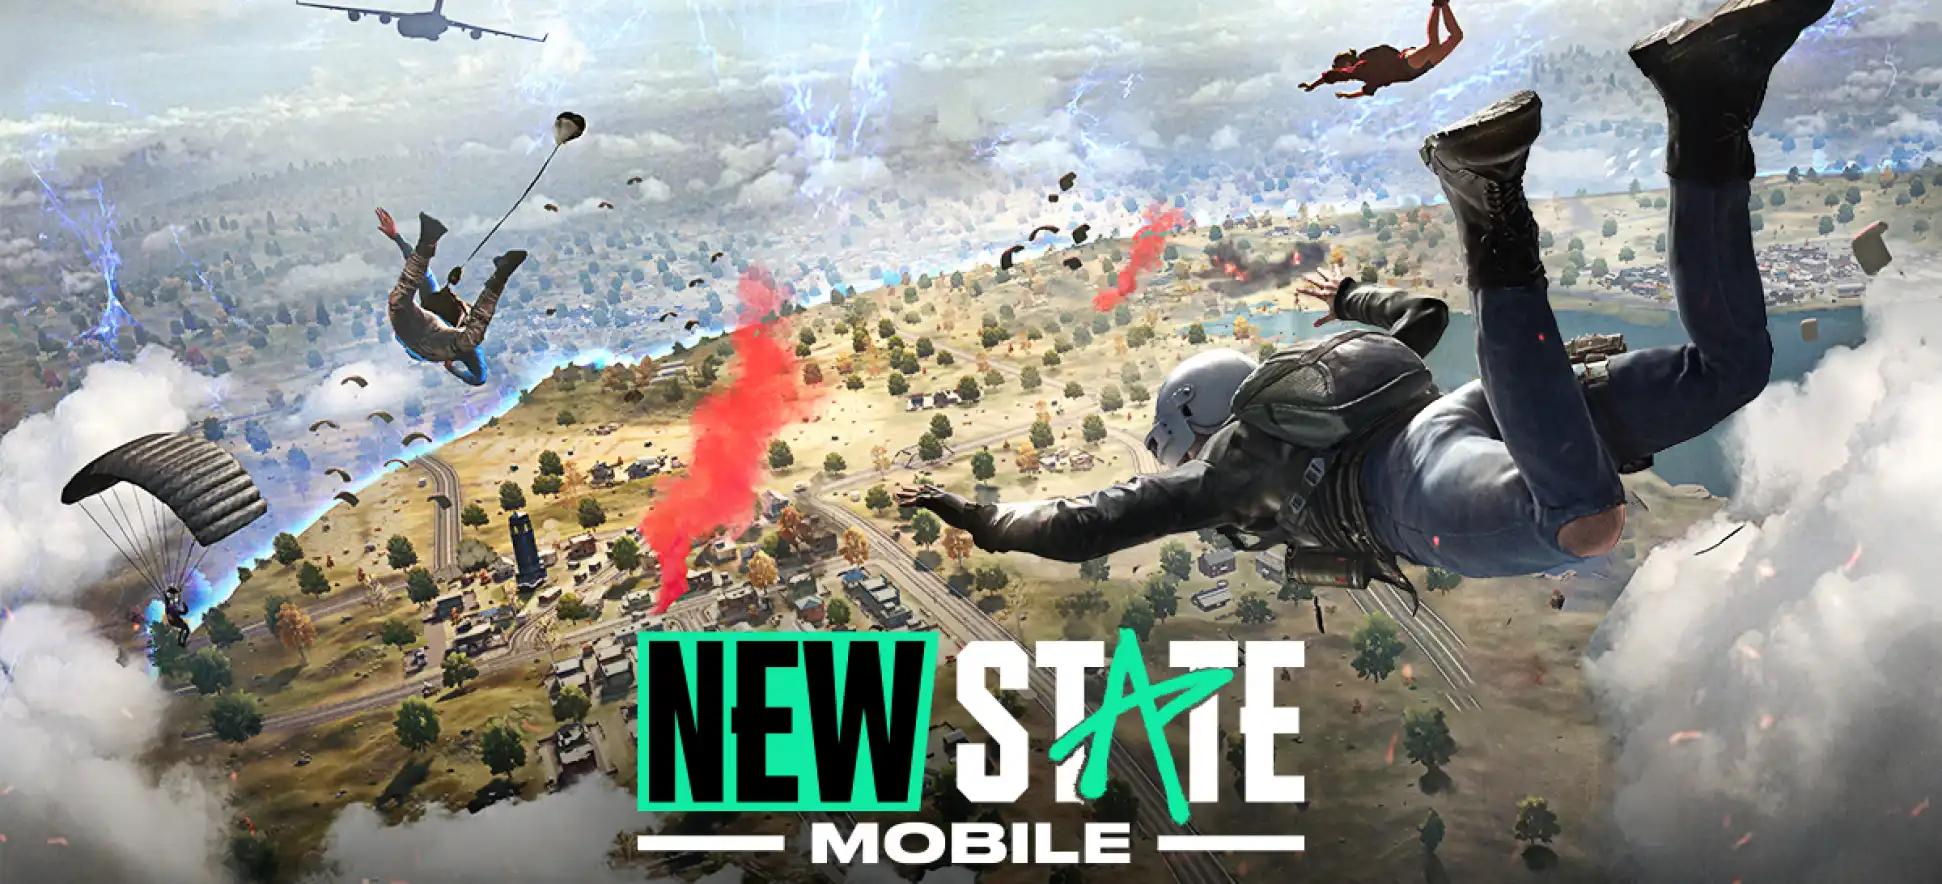 Игру new state. ПАБГ мобайл State. ПАБГ Нью Стейт. ПУБГ New State. PUBG mobile New State.